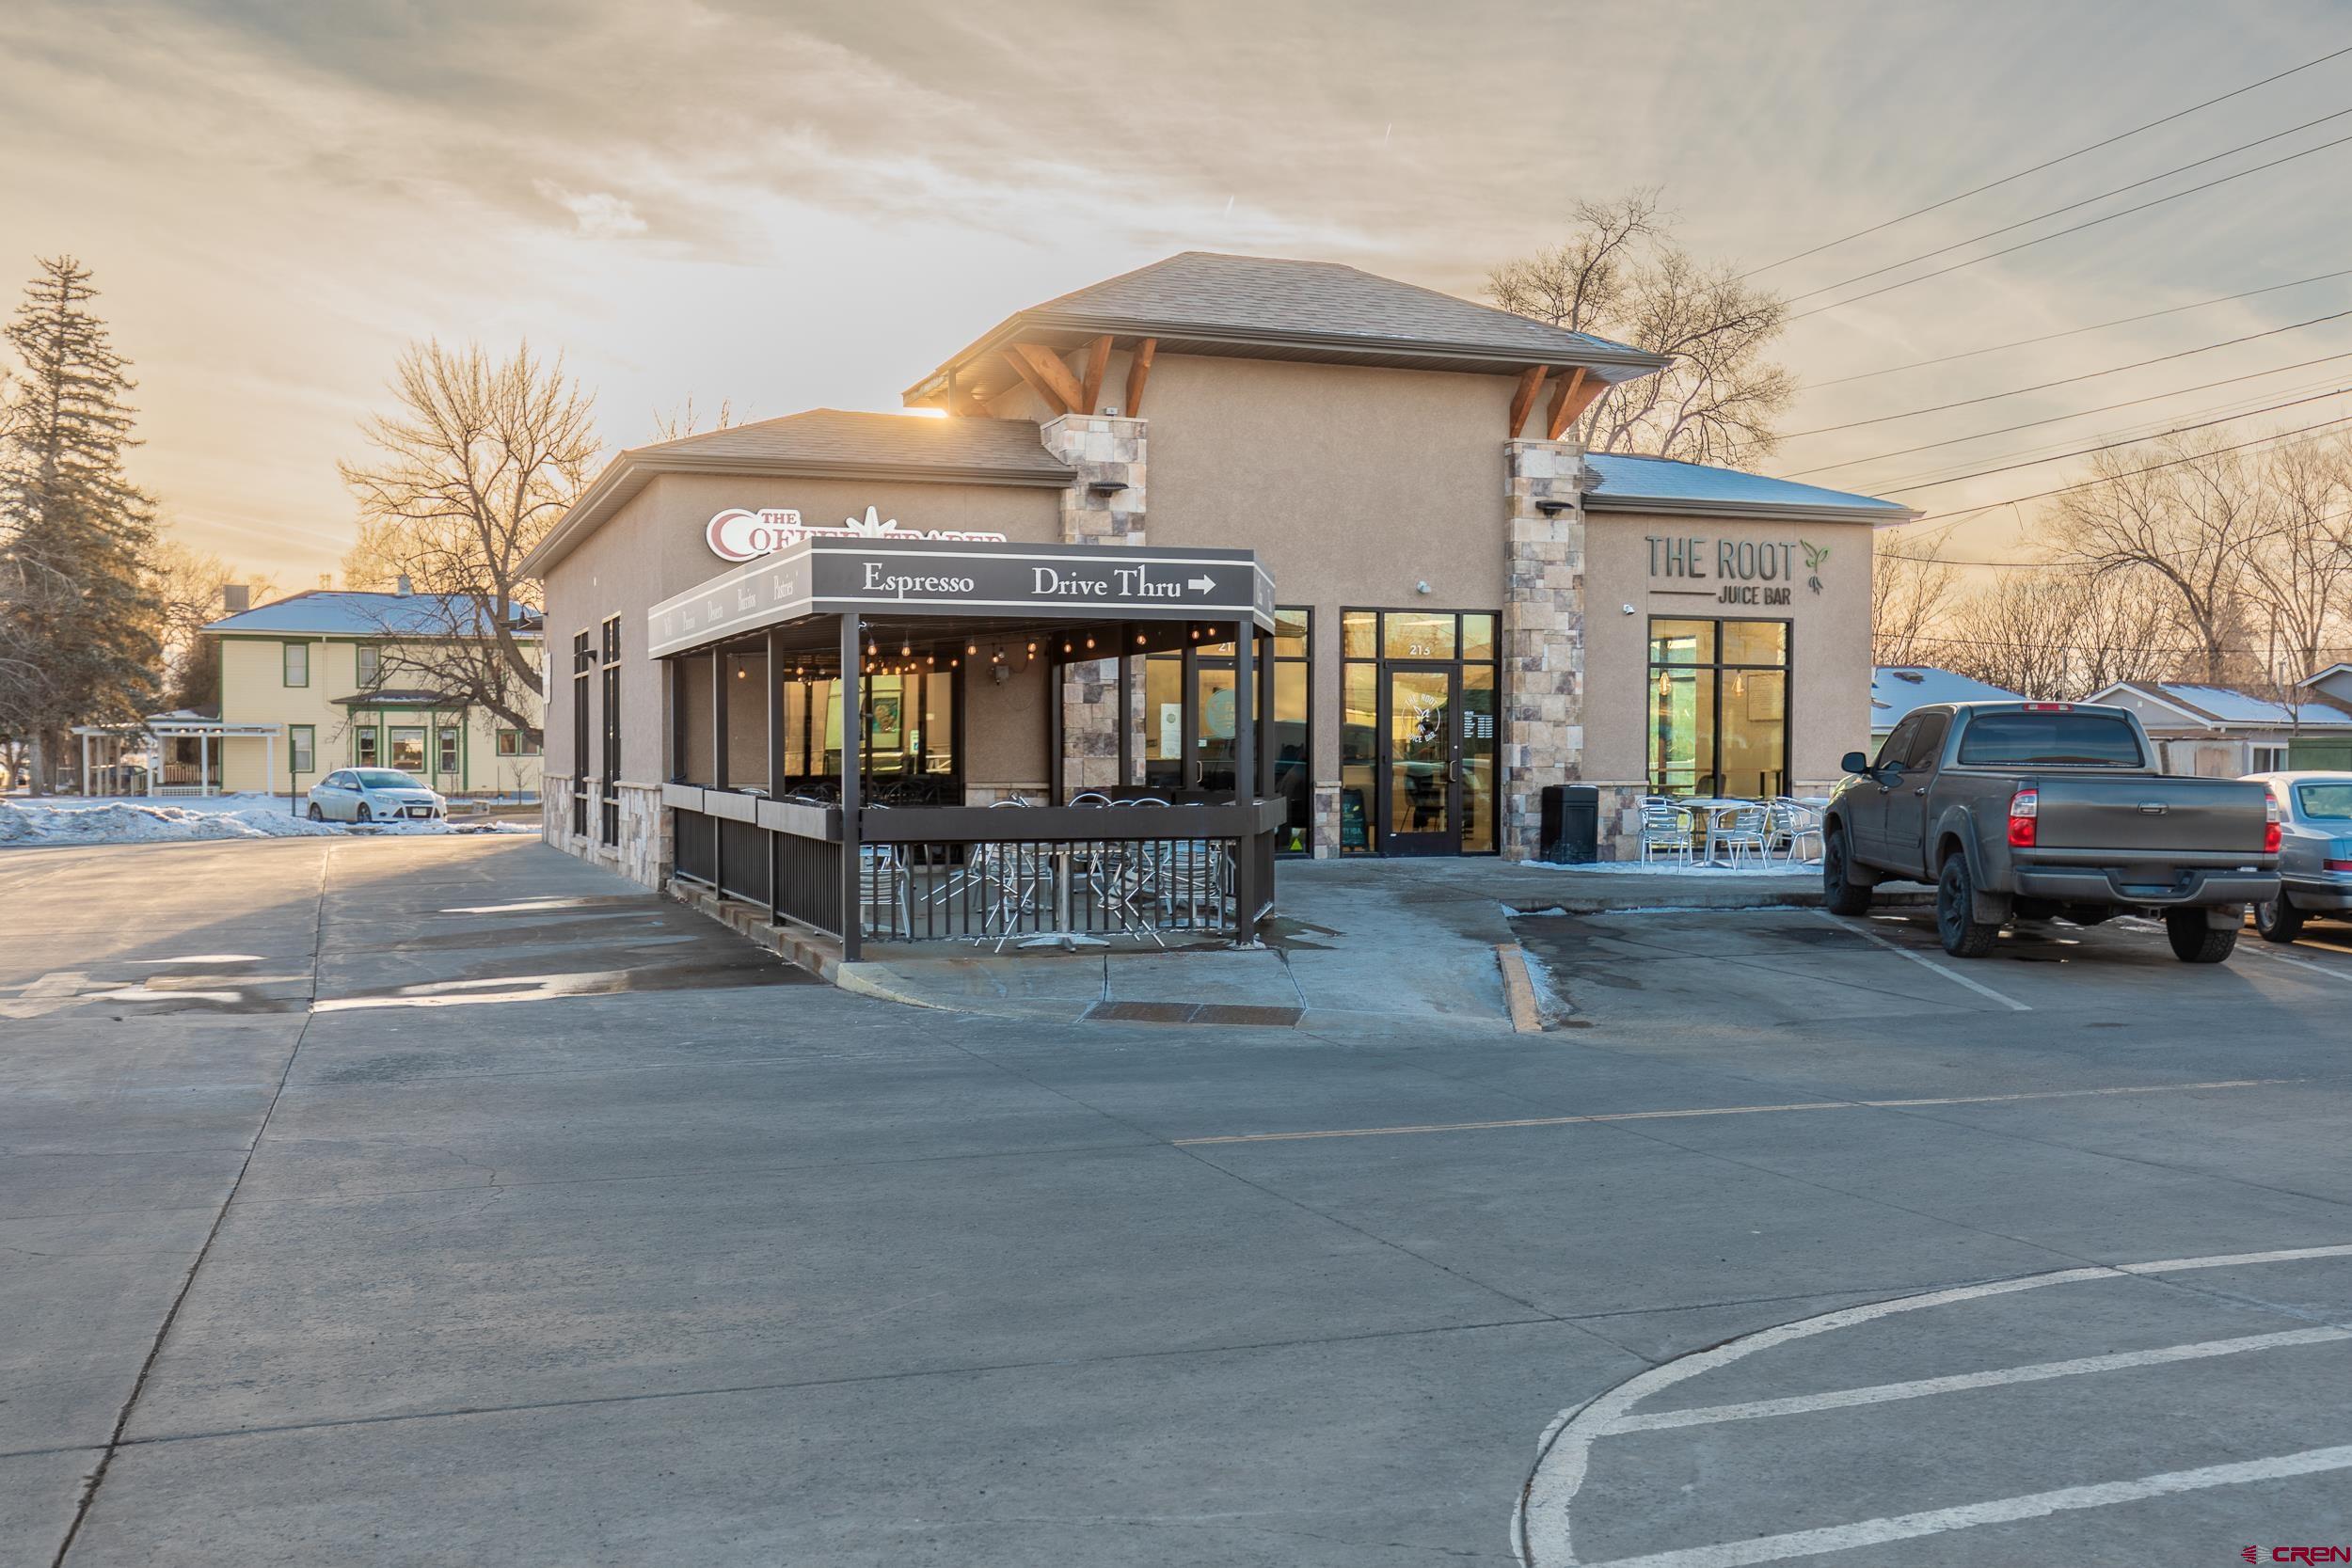 Excellent investment opportunity on the Western Slope of Colorado! This ideally located commercial space boasts 2 units with an 5.77% CAP rate in a B-2 commercial zone in the City of Montrose! The turnkey building (built in 2017) offers 2 retail commercial units with high quality long term tenants, high daily traffic exposure, and heavy pedestrian traffic as well. One unit is currently operated as a busy specialty coffee store chain with a drive-thru and the second unit is occupied by a trendy juice bar with high traffic and a popular following.   *Average daily traffic count: 25,000 vehicles (located within the second busiest intersection in the City of Montrose)  *Nearby Pedestrian Traffic: Montrose Regional Health Center, Montrose High School, Colorado Mesa University Montrose Campus and just blocks from Main Street.